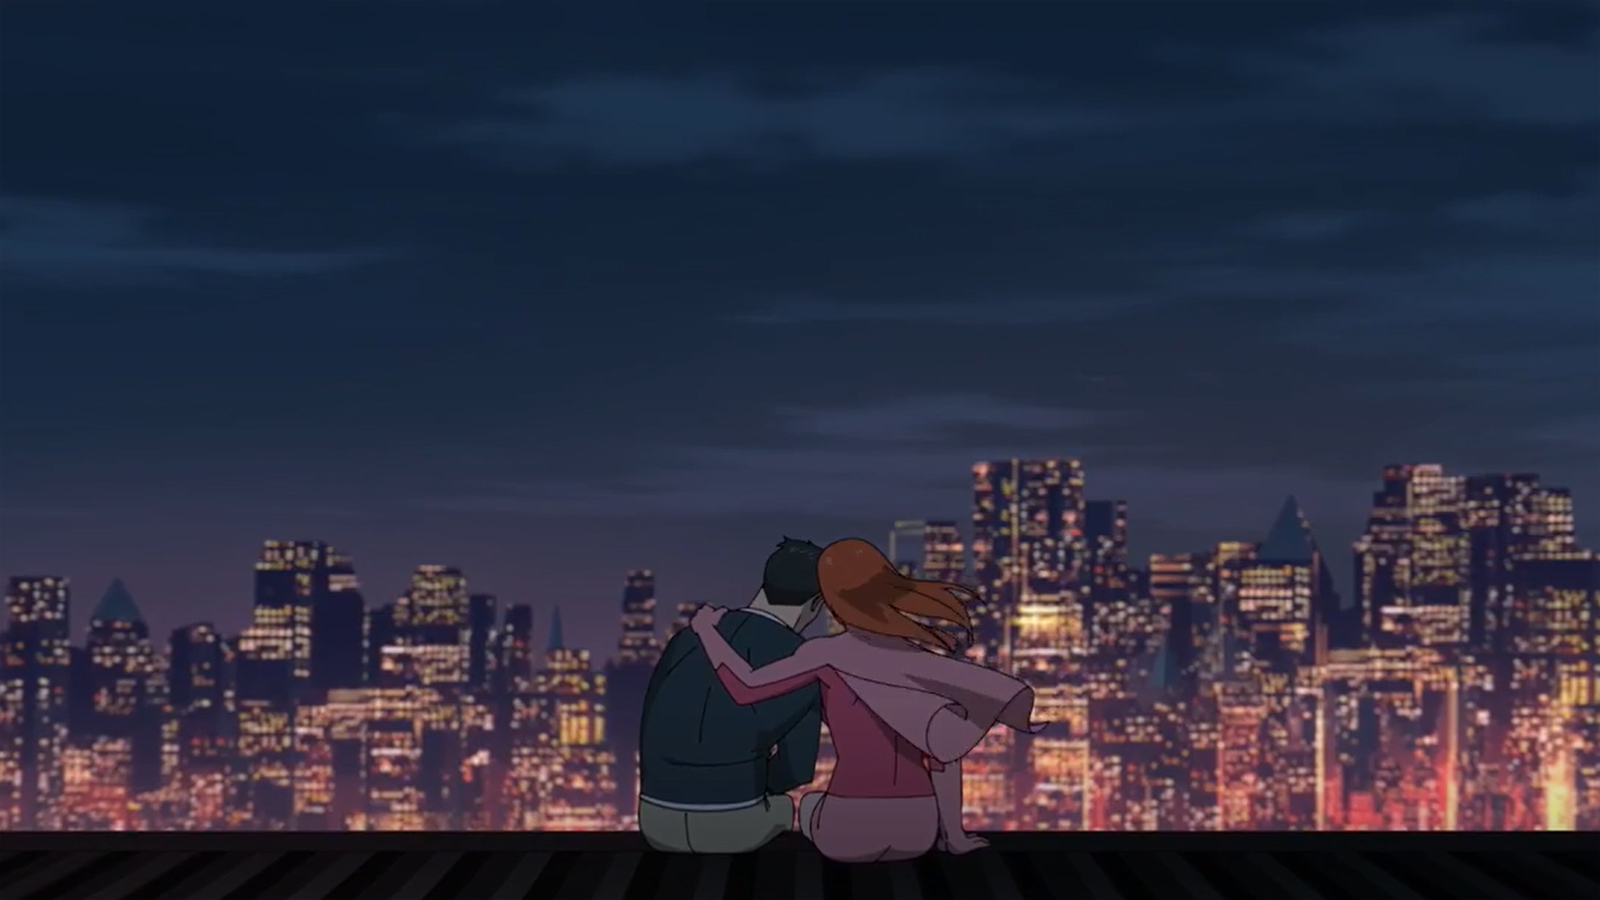 Mark and Eve sit on a rooftop looking at the night sky in Invincible season 2 episode 8